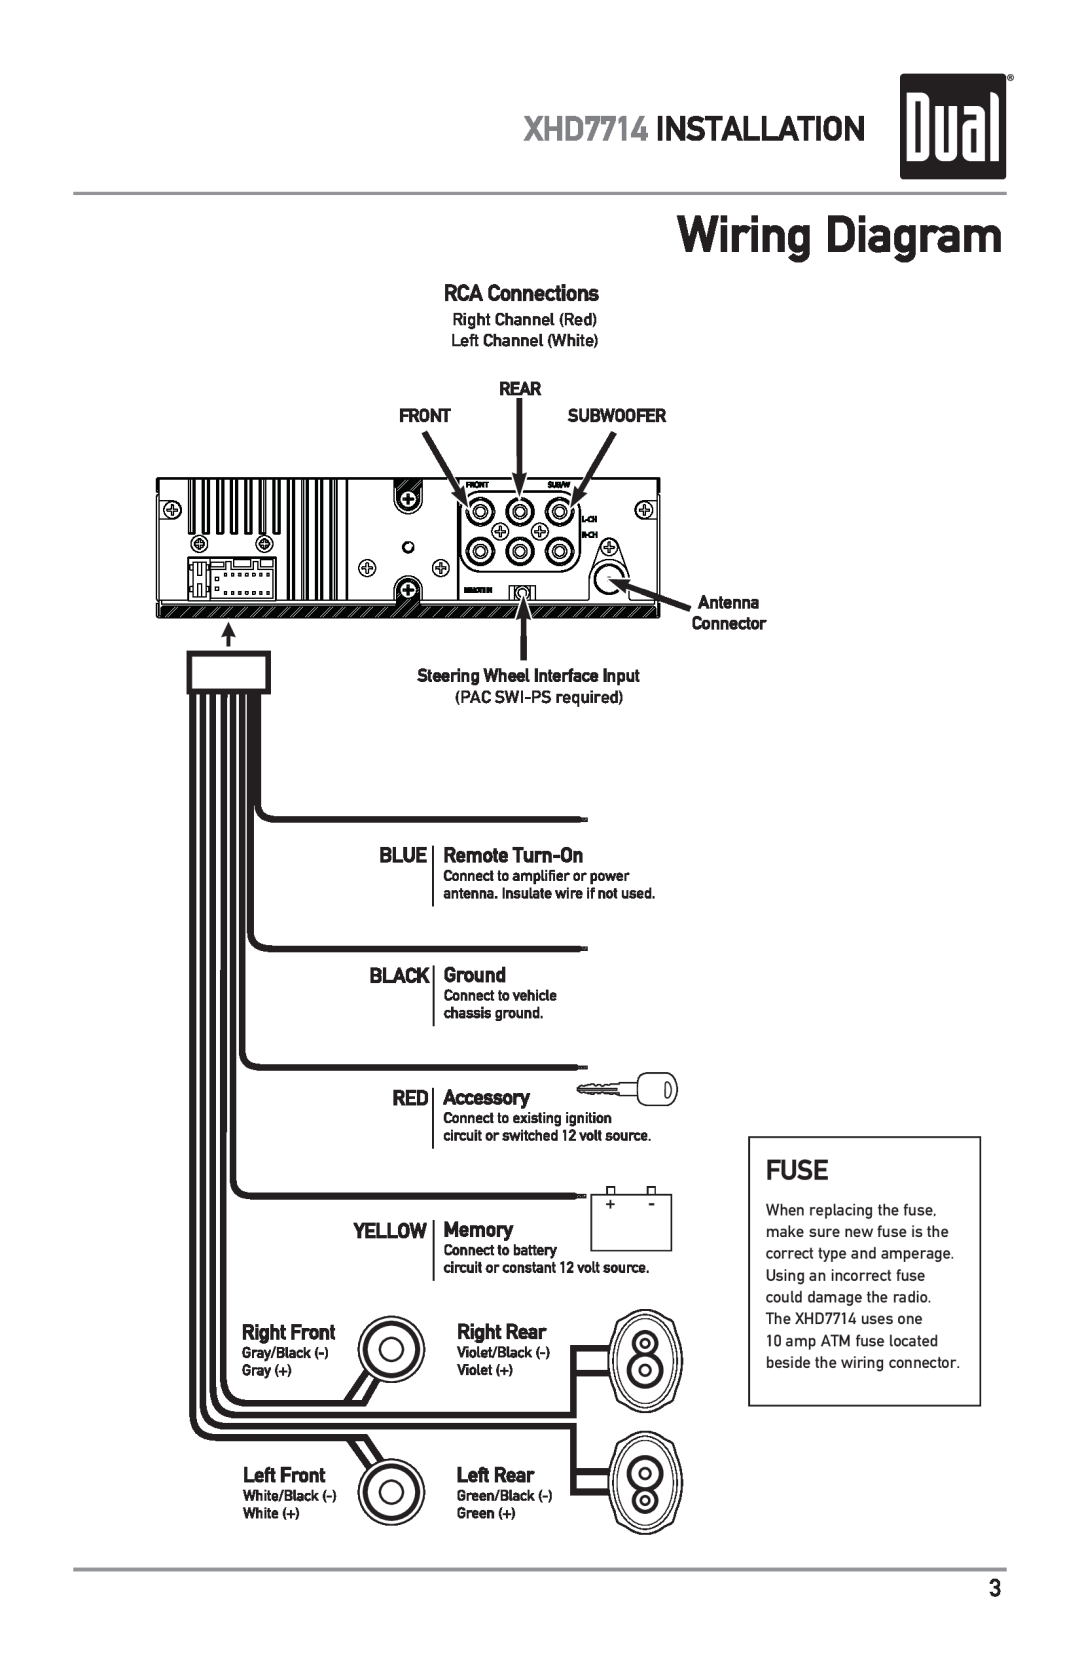 Dual owner manual Wiring Diagram, Fuse, XHD7714 INSTALLATION, RCA Connections, Rear, Front, Subwoofer 